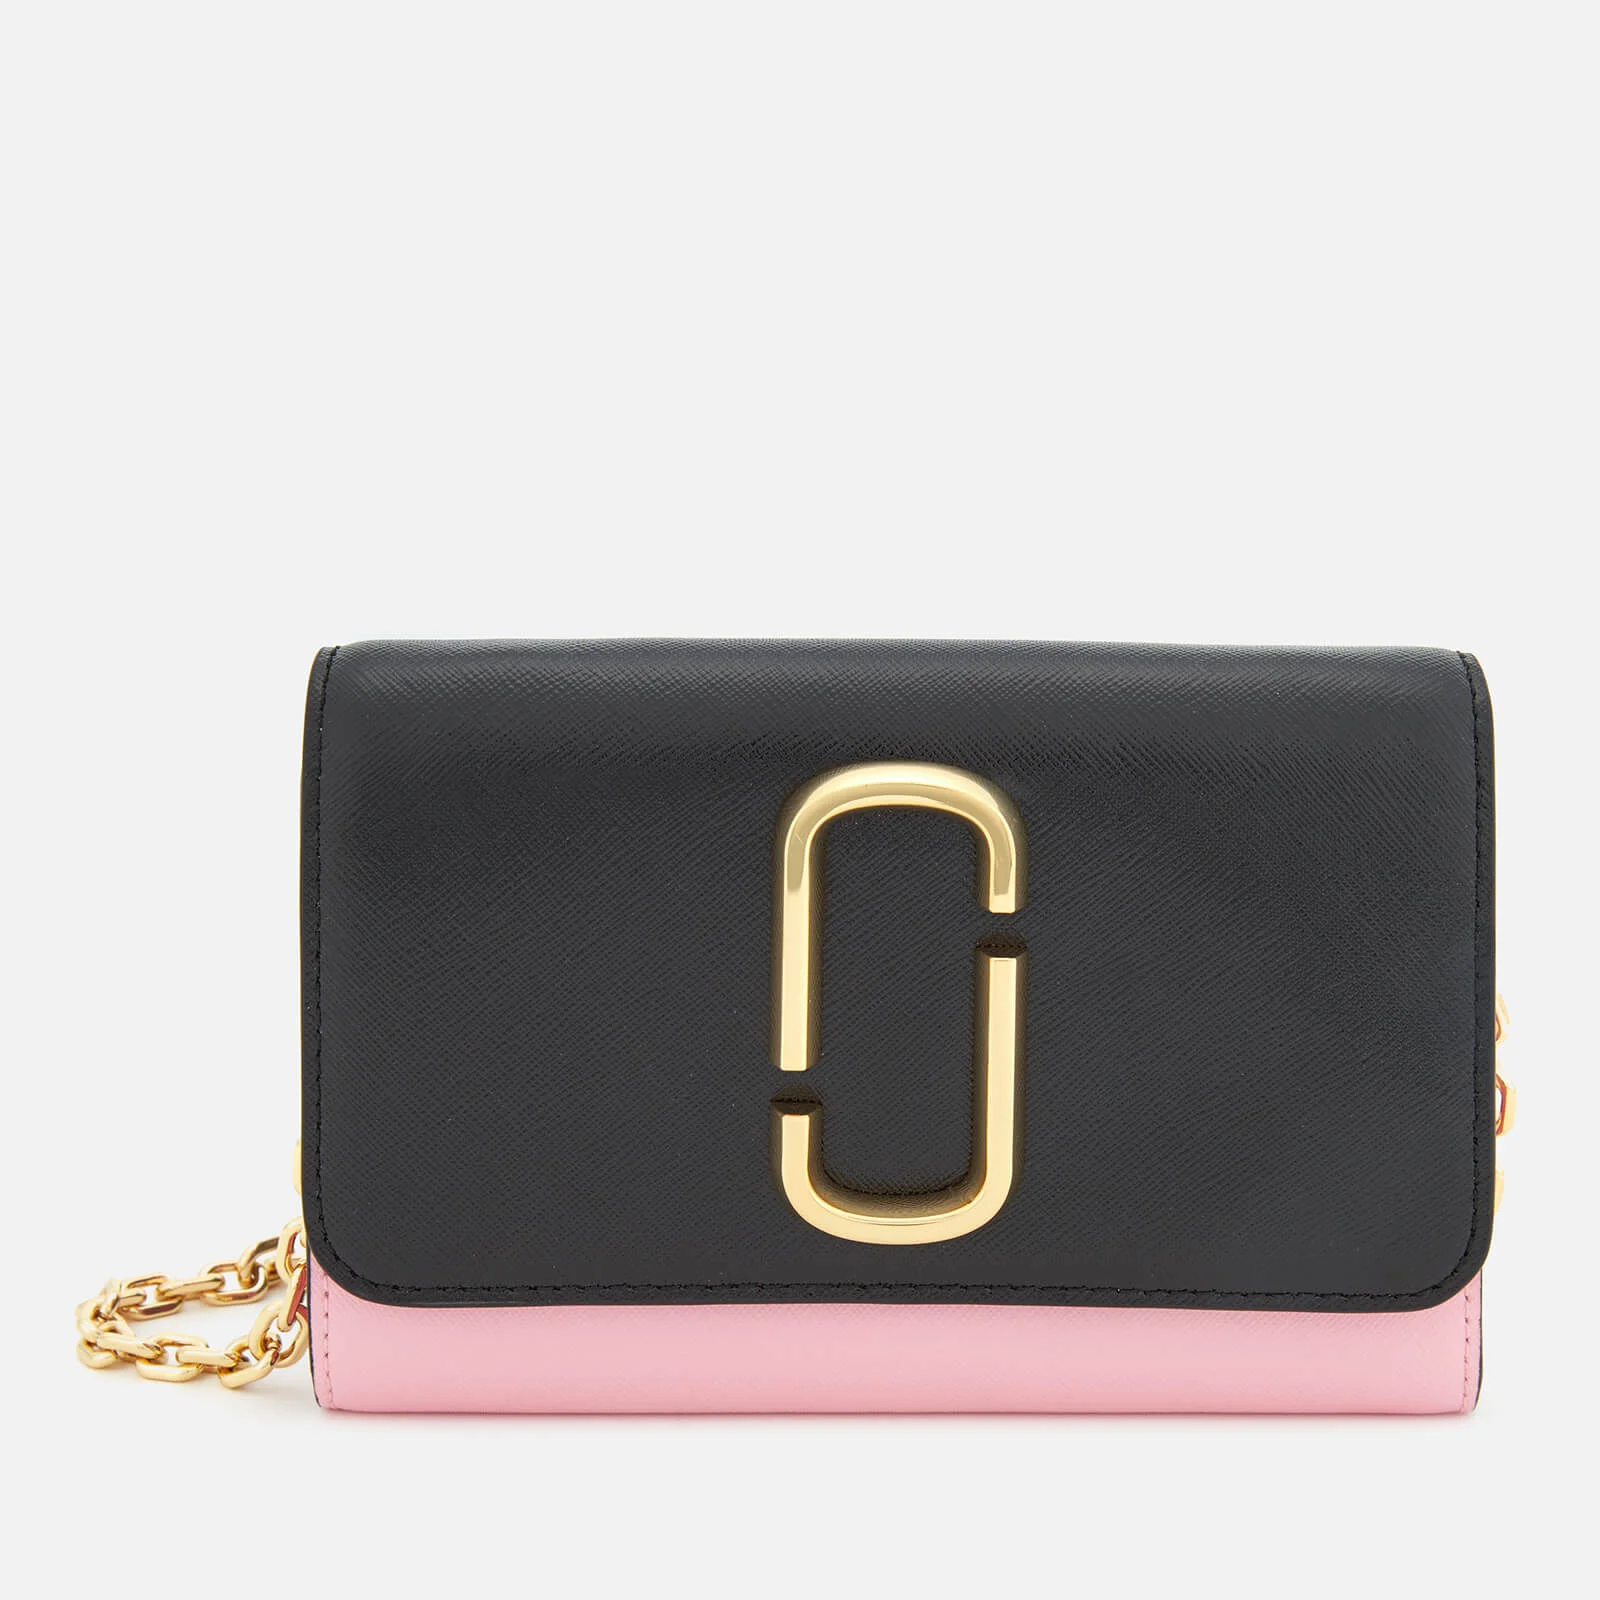 Marc Jacobs Women's Snapshot Wallet on Chain - Black/Baby Pink Image 1